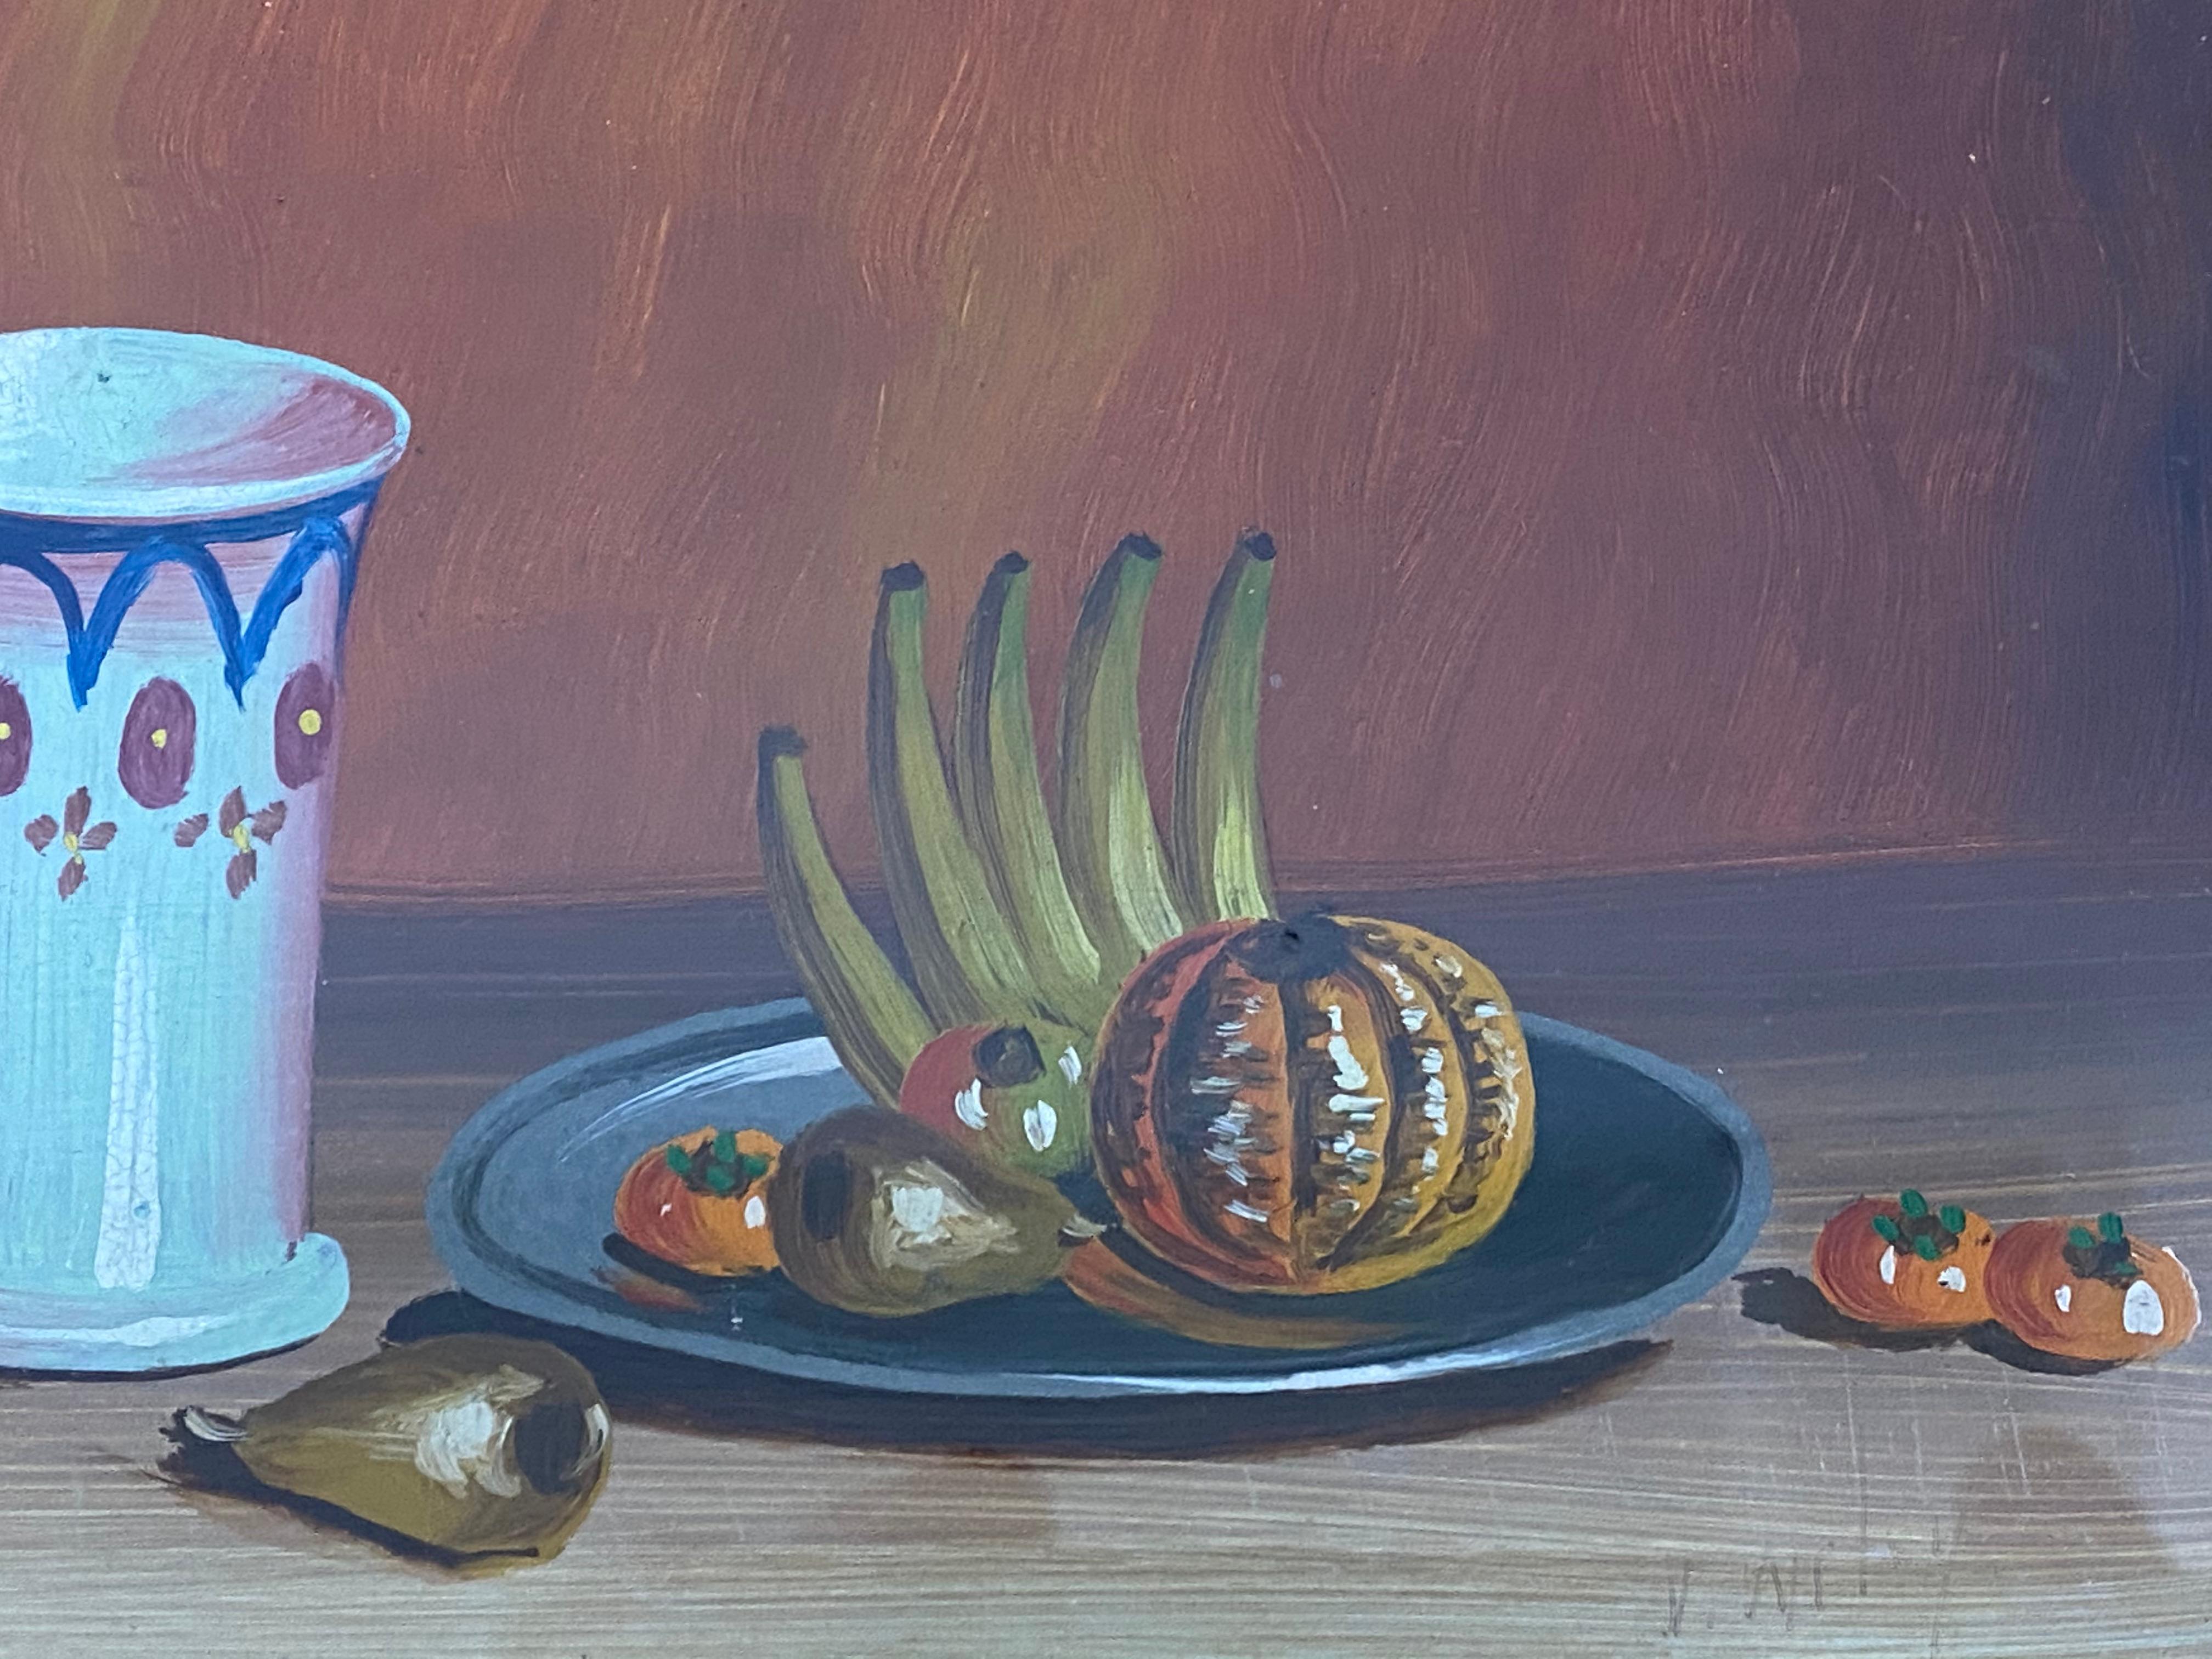 Vintage Still Life Painting with Fruit and Porcelain Cup c.1970

Original oil on masonite under glass

Masonite dimensions 7